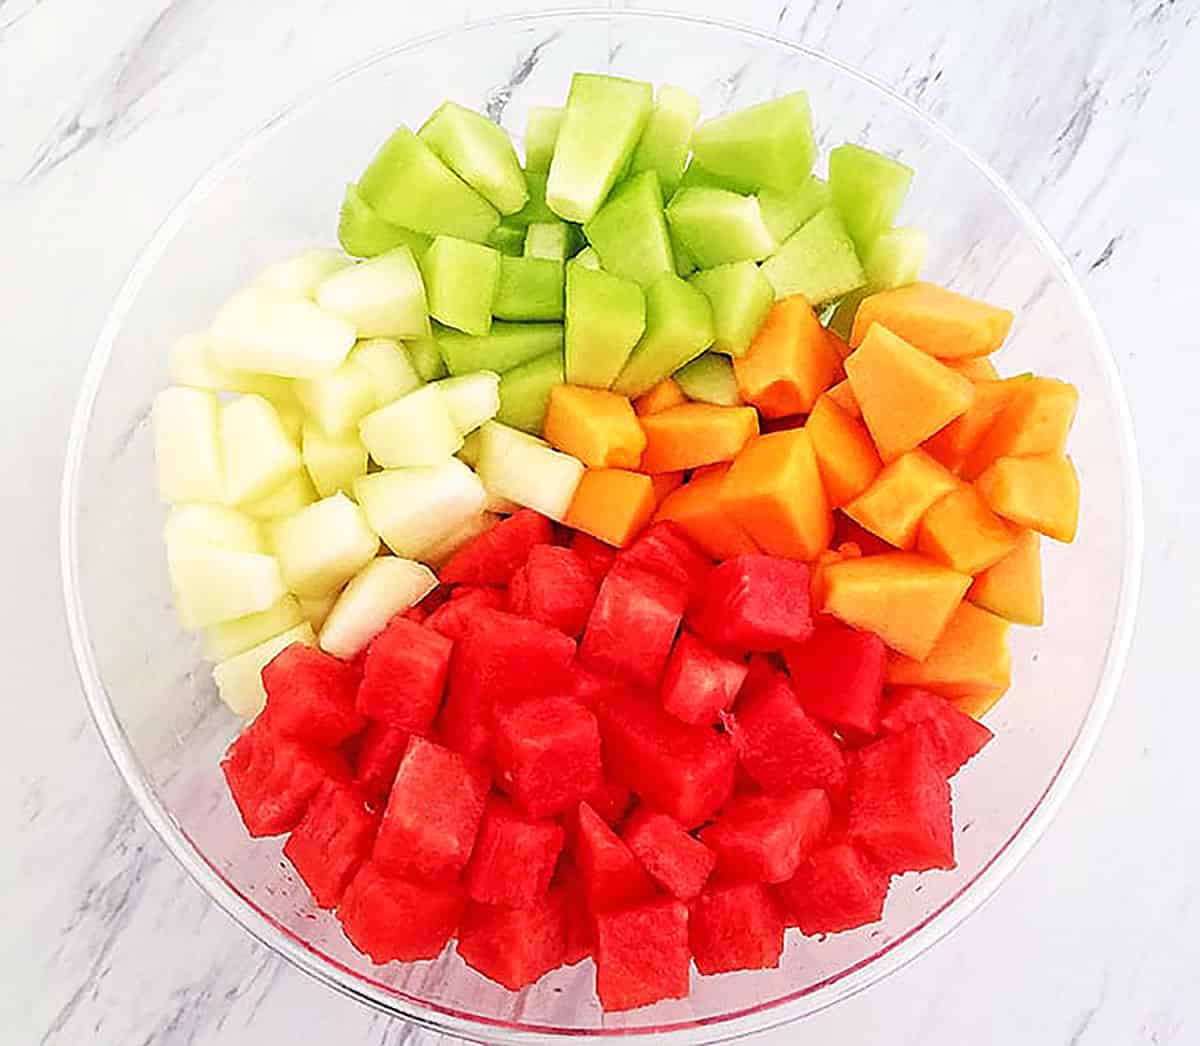 Cut all melons into cubes and place into a large bowl.